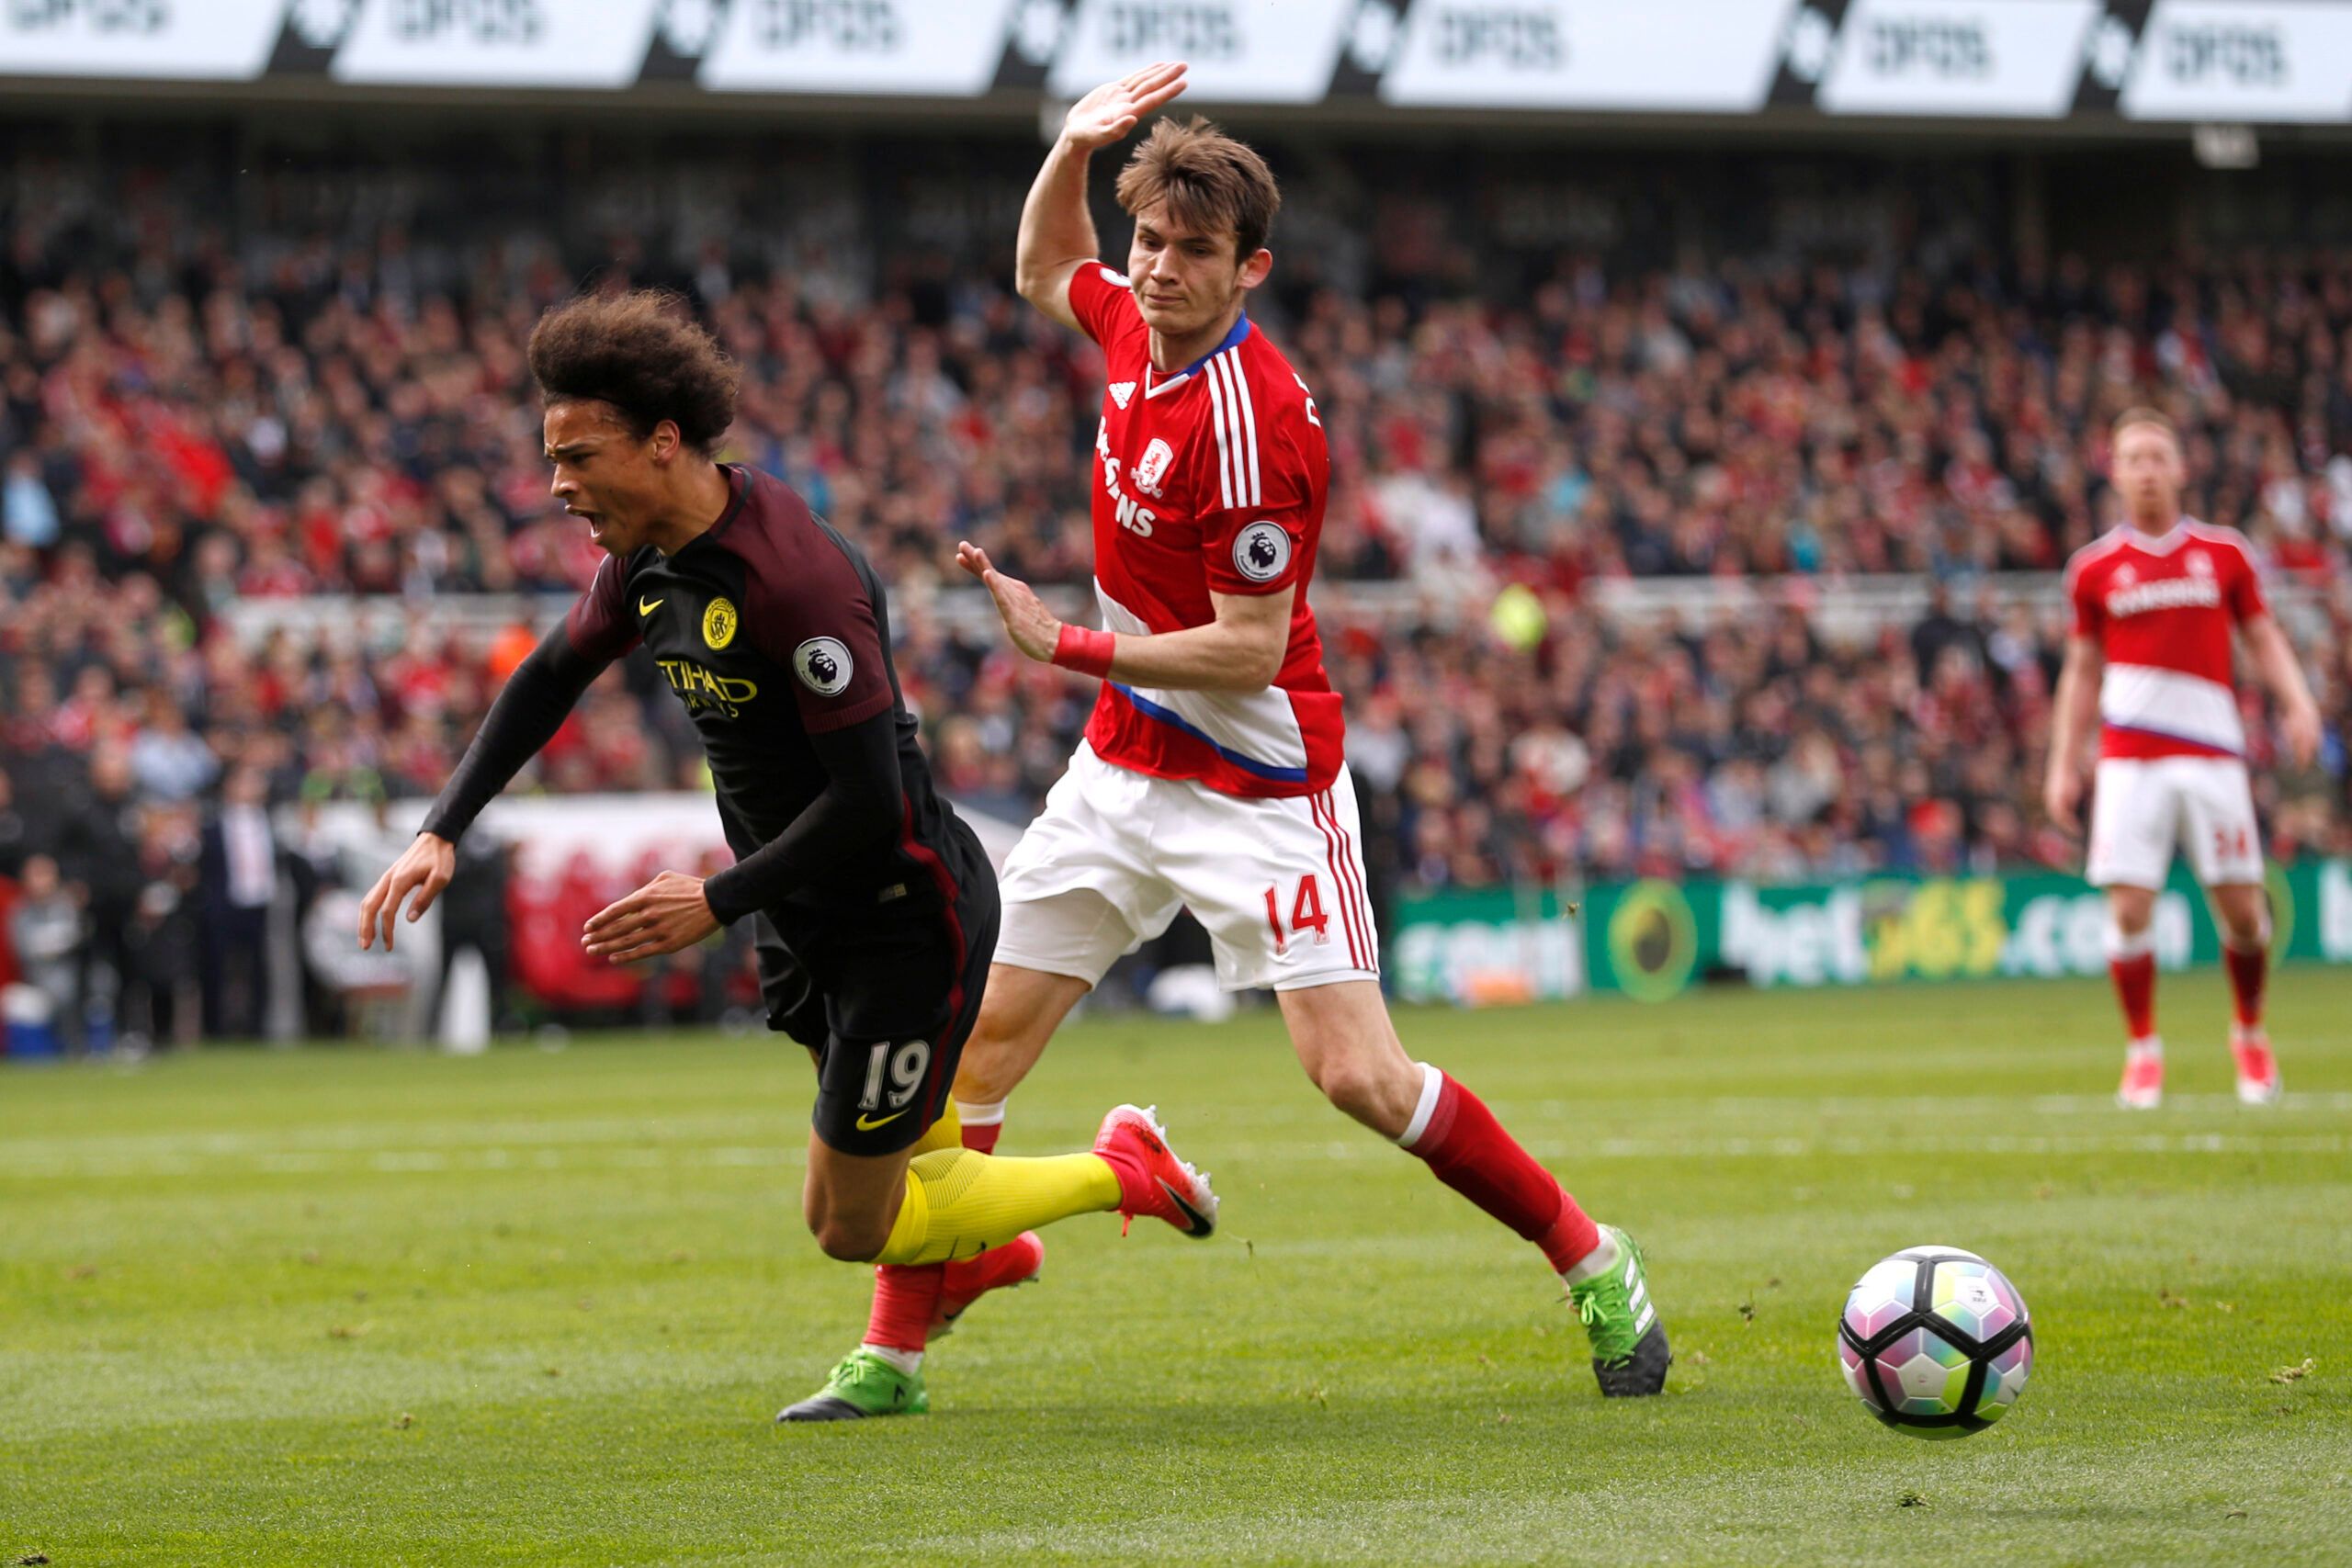 Britain Football Soccer - Middlesbrough v Manchester City - Premier League - The Riverside Stadium - 30/4/17 Middlesbrough's Marten De Roon concedes a penalty against Manchester City's Leroy Sane  Action Images via Reuters / Lee Smith Livepic EDITORIAL USE ONLY. No use with unauthorized audio, video, data, fixture lists, club/league logos or 